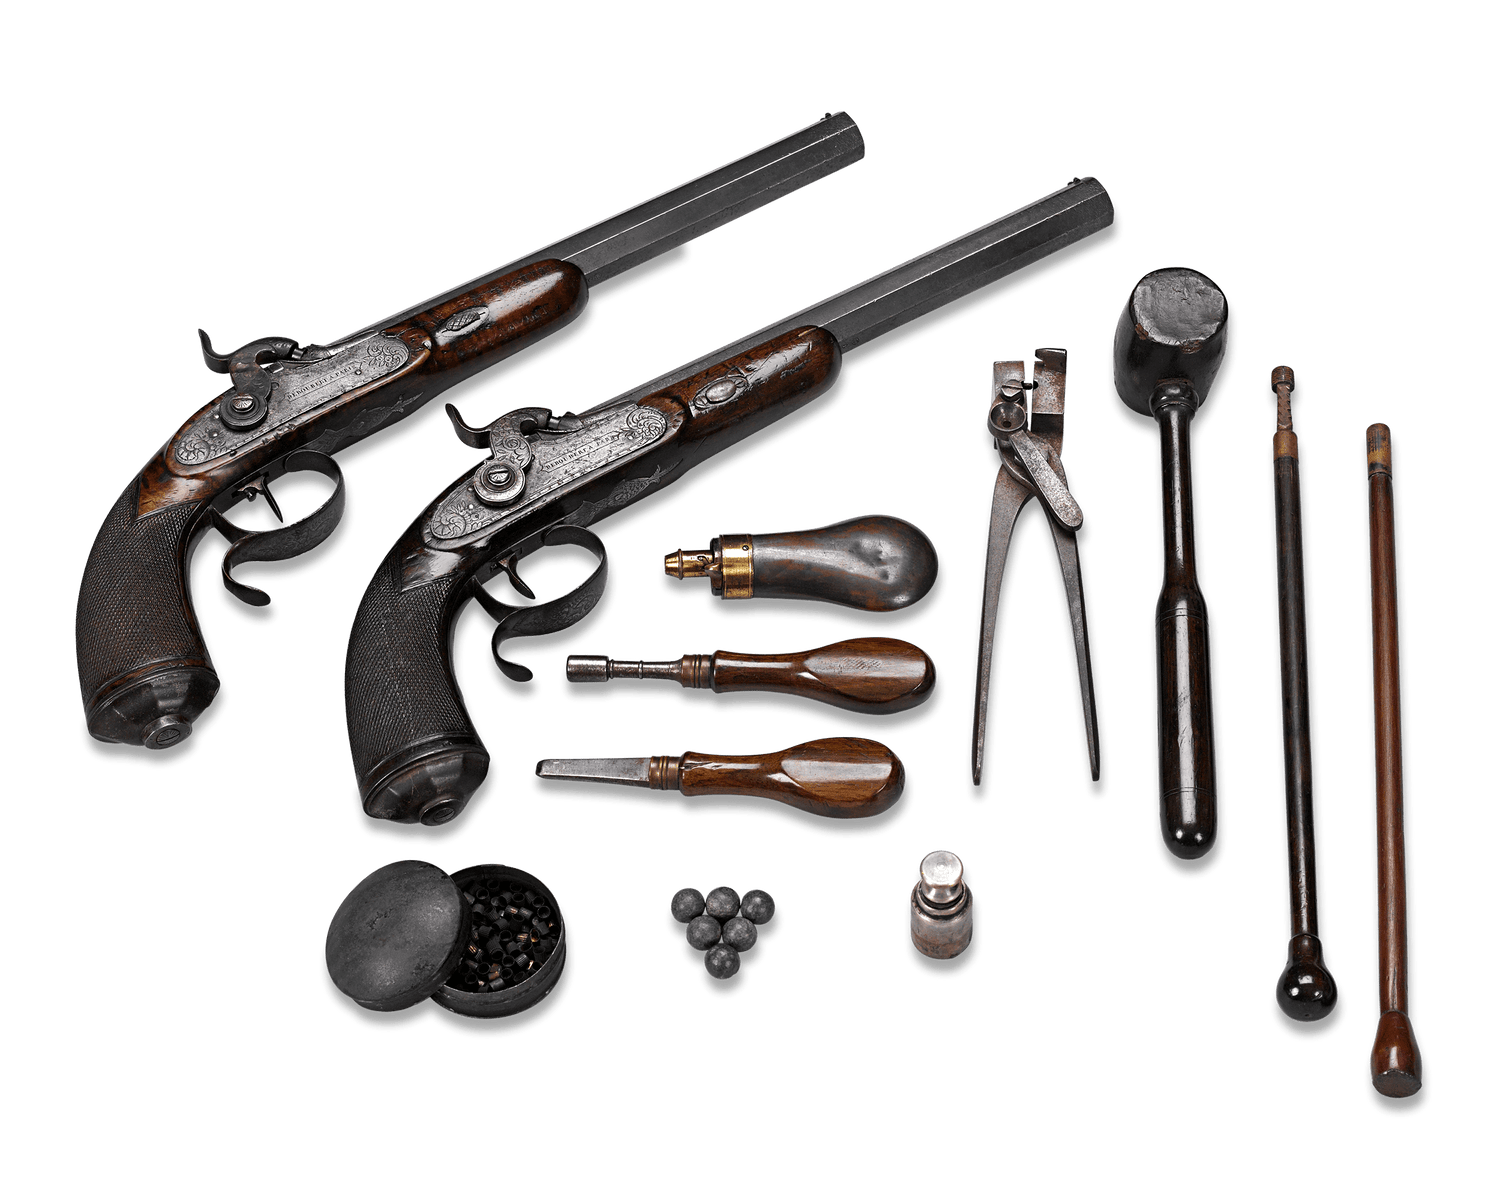 It is seldom that a pair of 19th-century dueling pistols are found in such complete condition